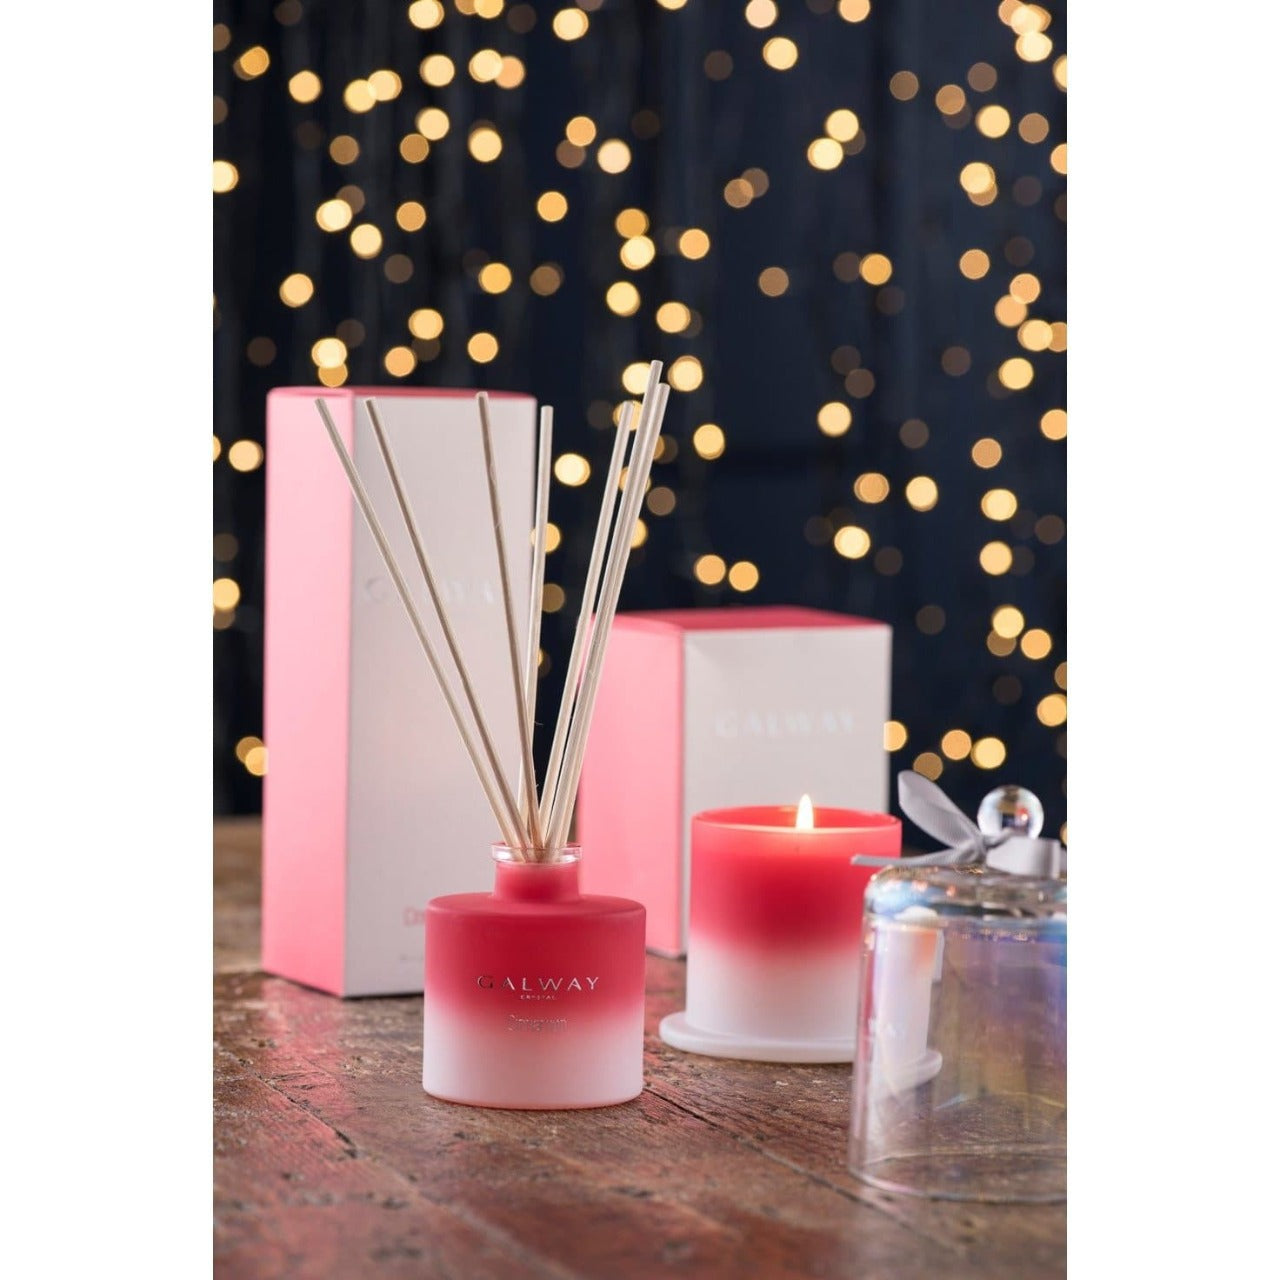 Galway Crystal Cinnamon Scented Gift Set  Once again the Galway Crystal's Christmas range does not disappoint, with beautiful new introductions in 2021. 